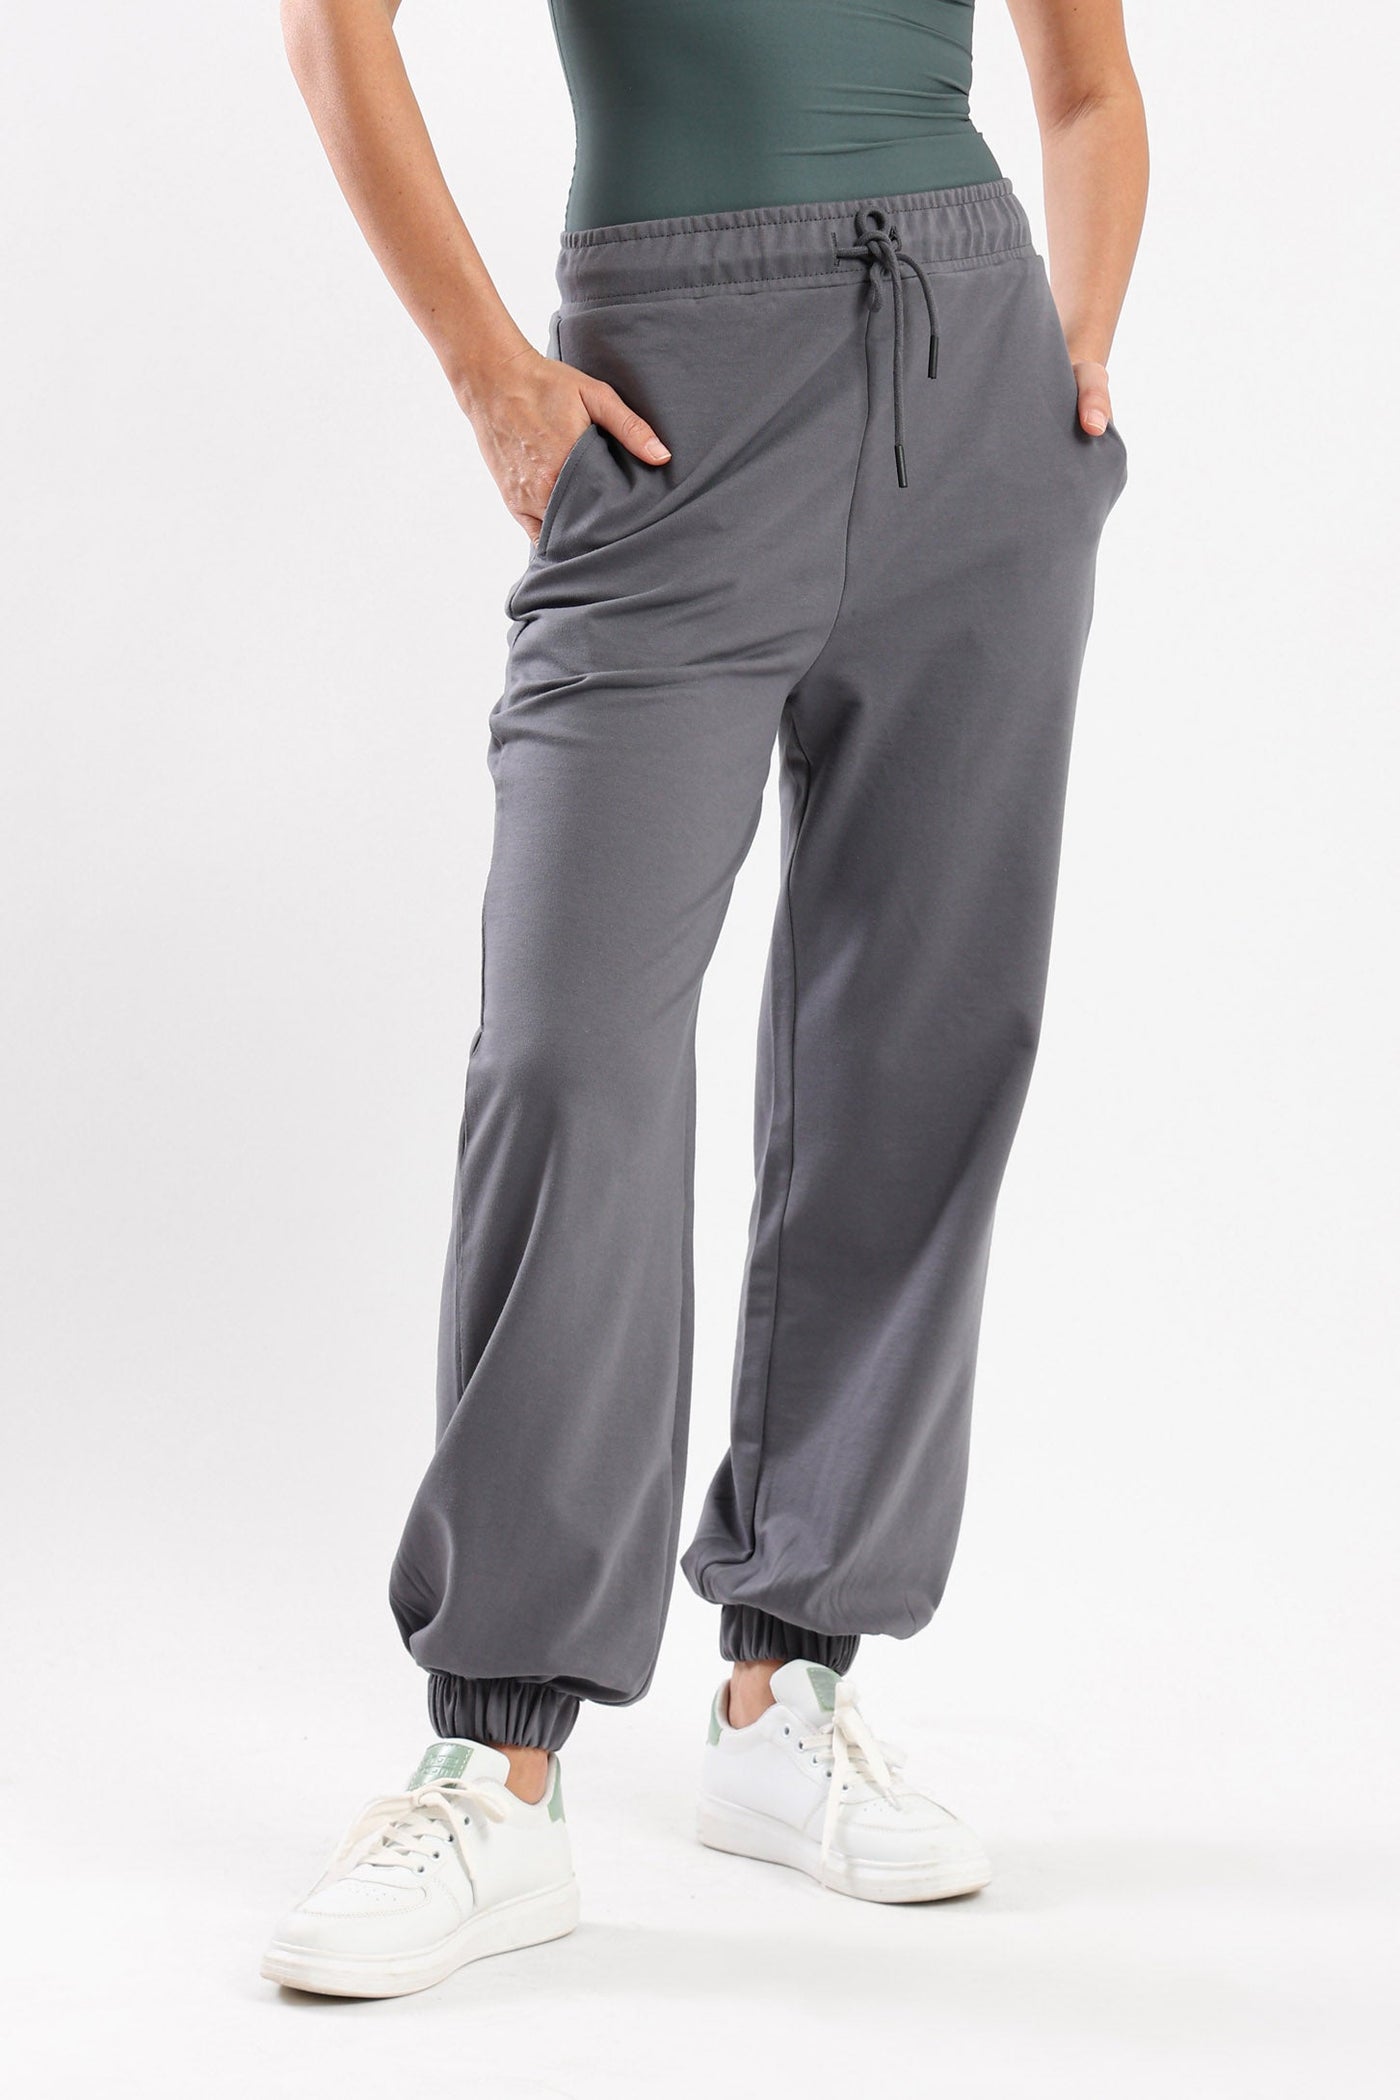 ALL DAY COMFORT JOGGERS - CHARCOAL